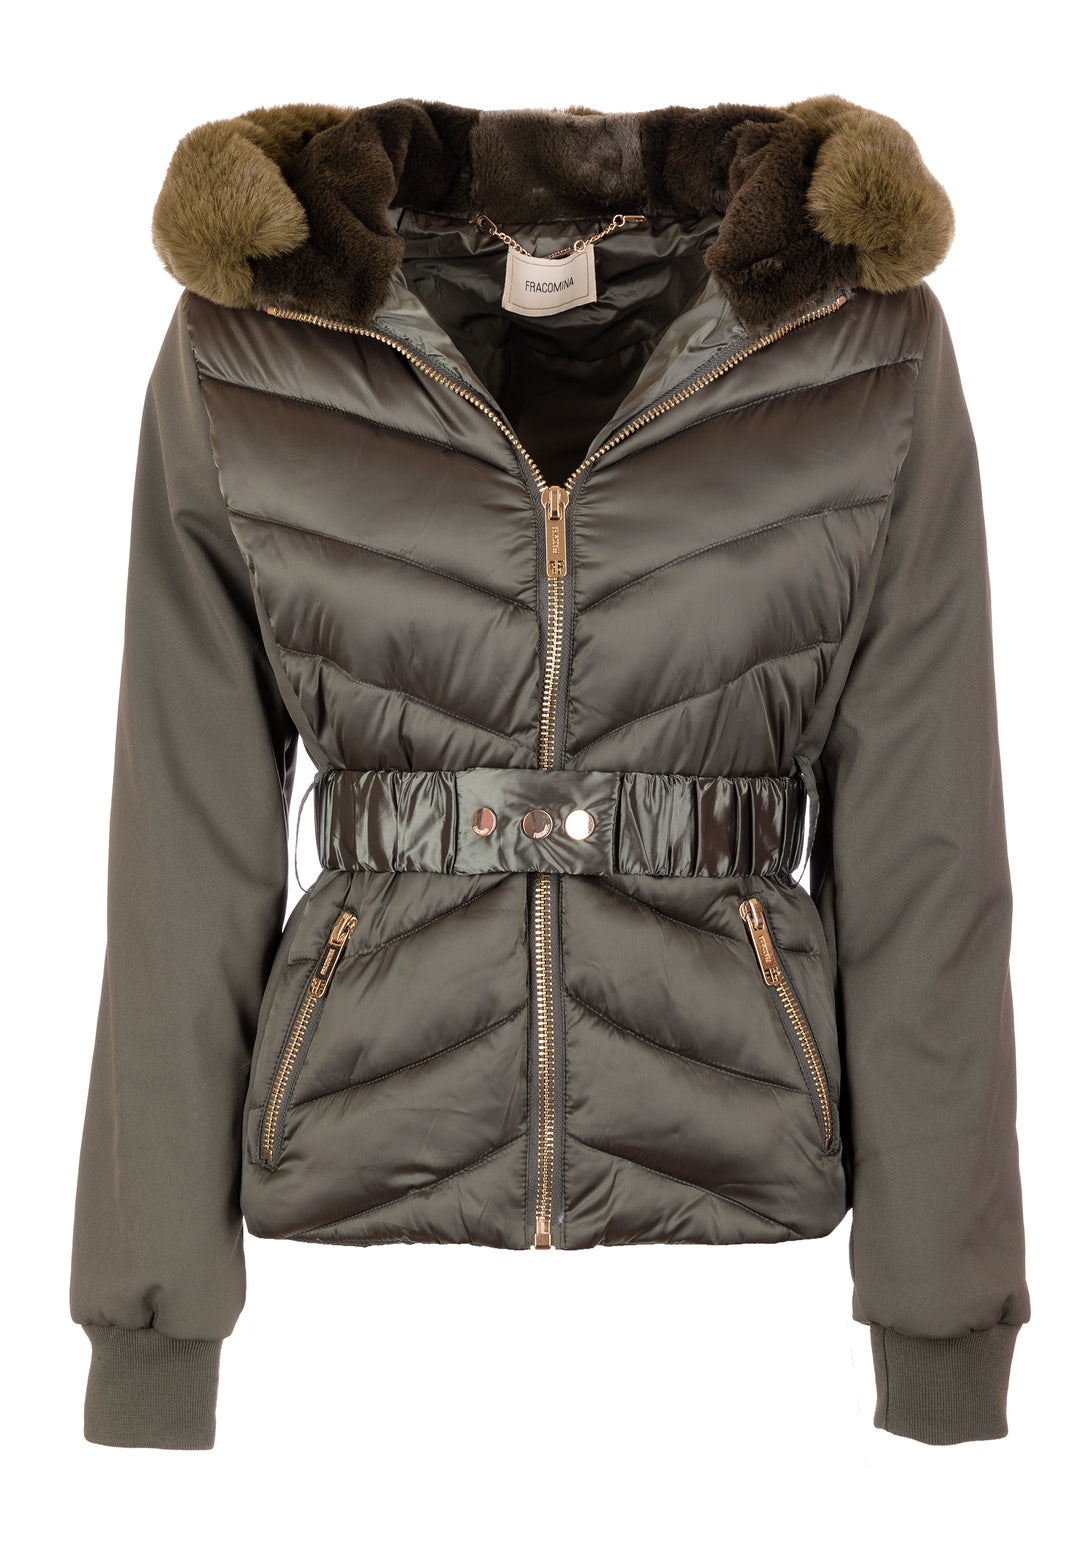 Padded jacket slim fit made in quilted fabric